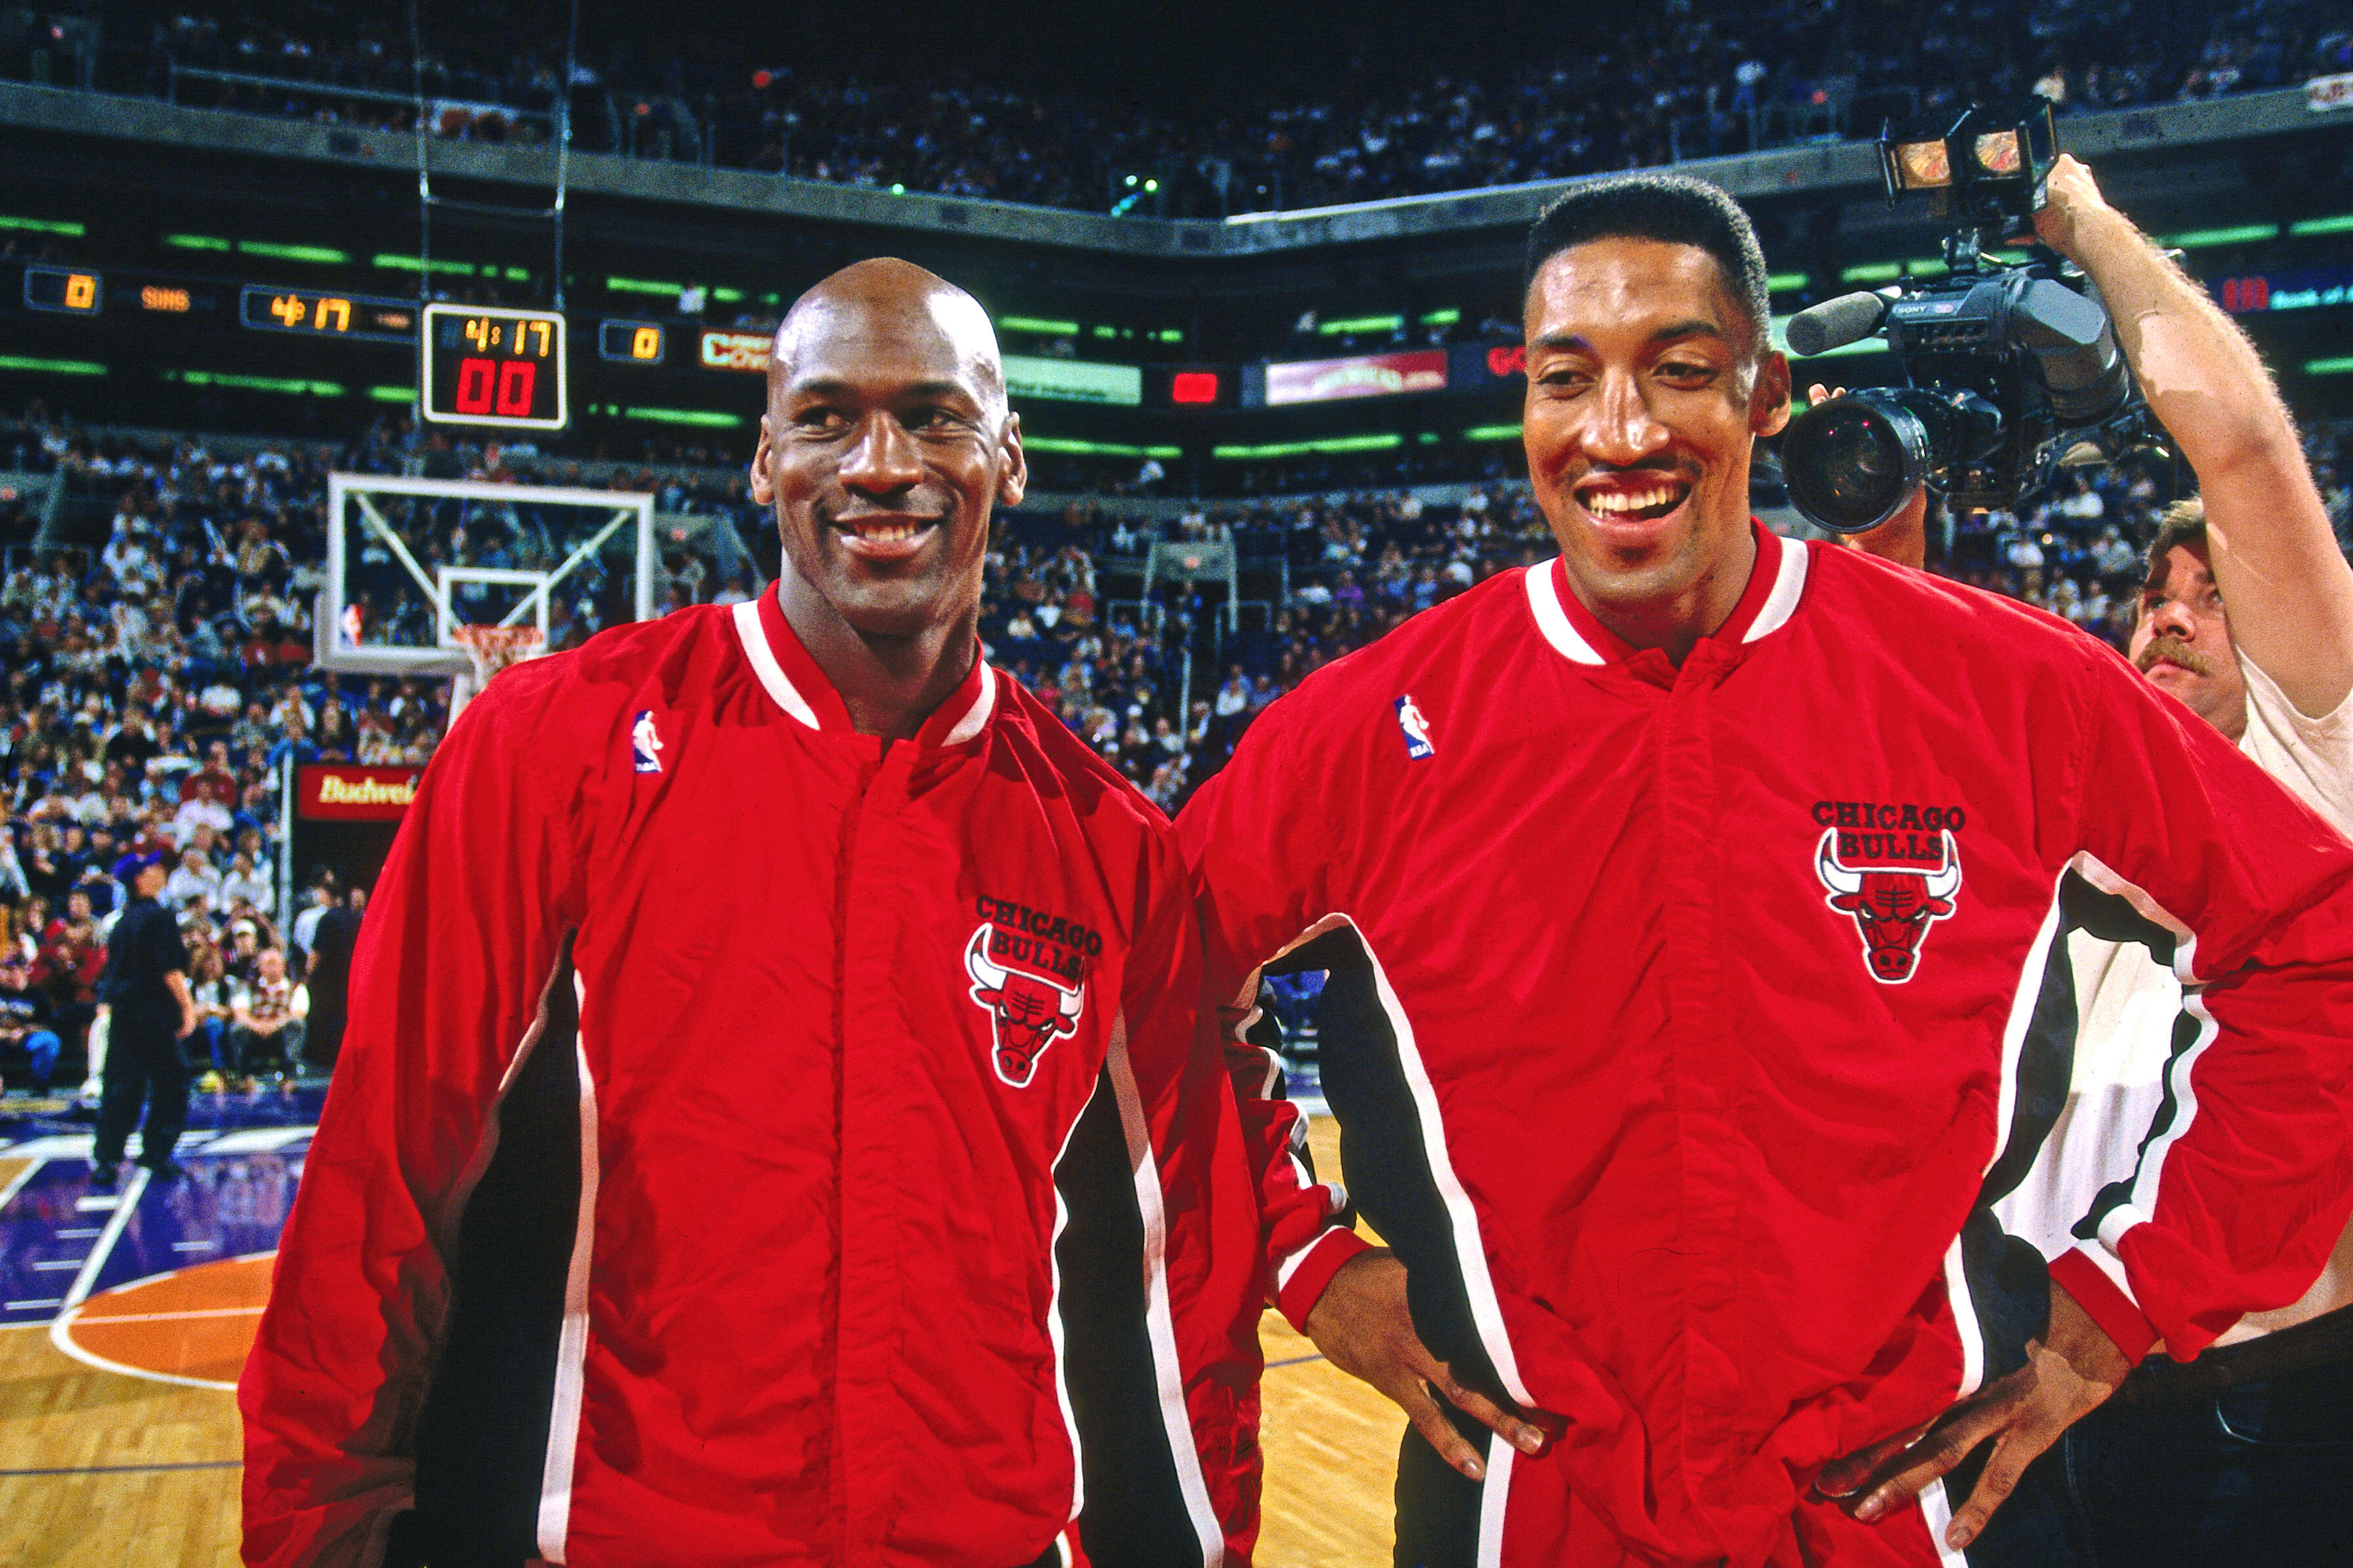 Would the Chicago Bulls have won six championships without Scottie Pippen?  - Quora